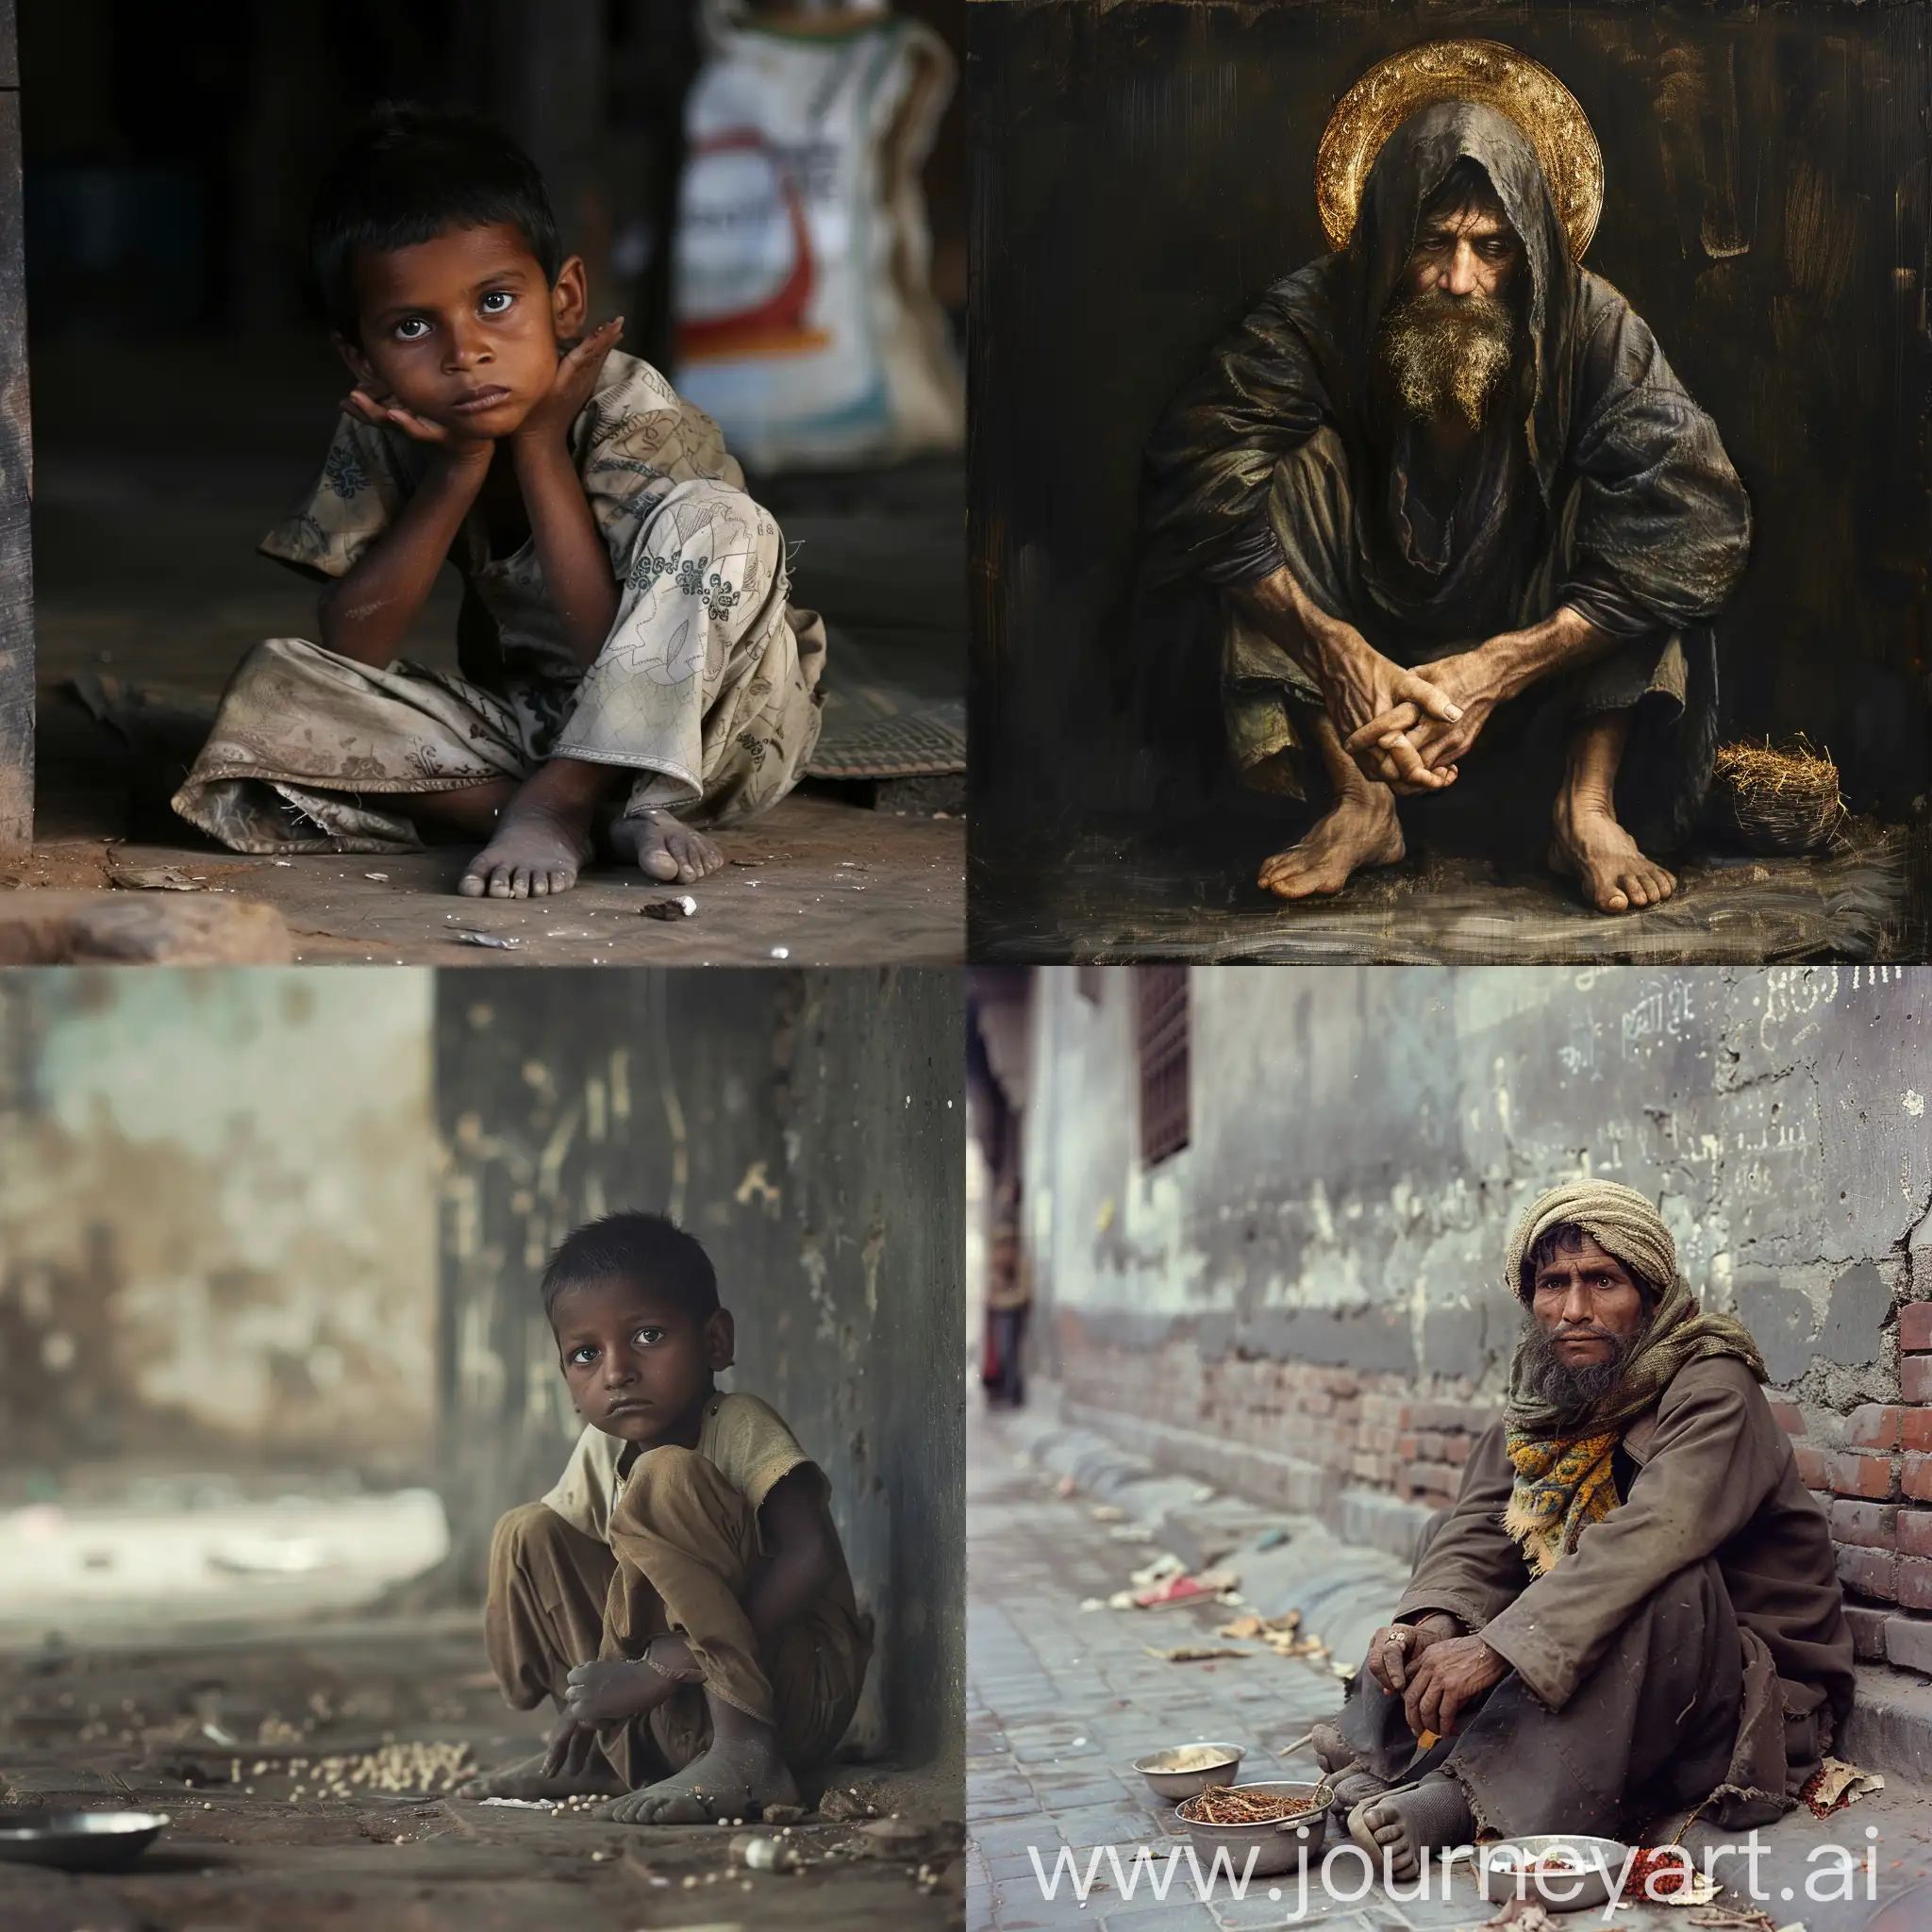 Portraying-Spiritual-Poverty-A-Solitary-Figure-in-Vast-Emptiness